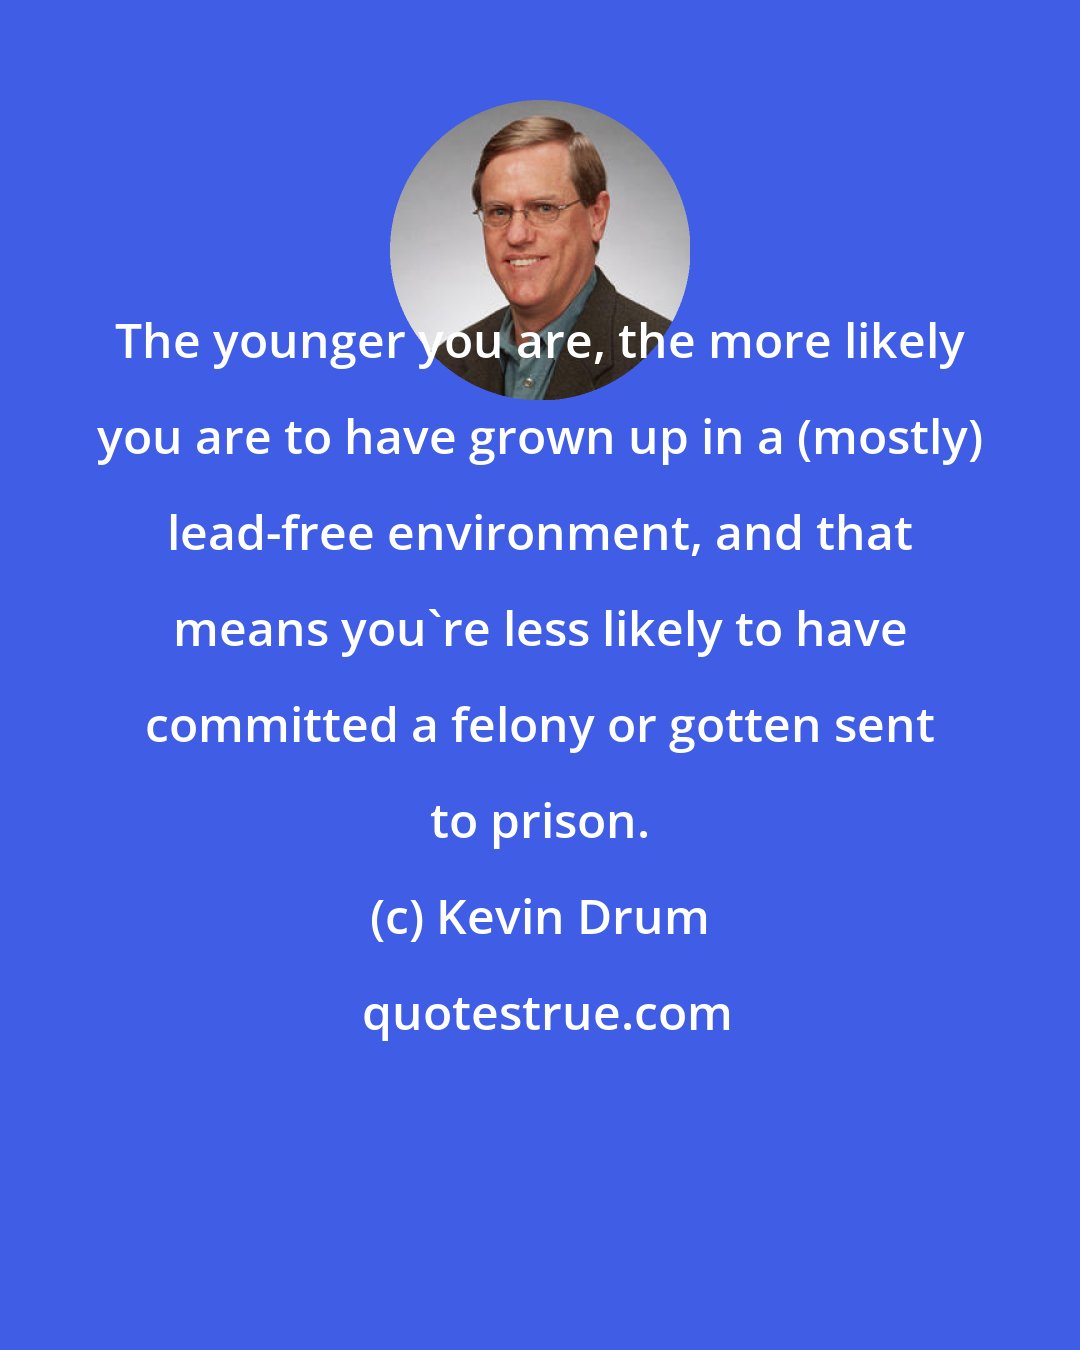 Kevin Drum: The younger you are, the more likely you are to have grown up in a (mostly) lead-free environment, and that means you're less likely to have committed a felony or gotten sent to prison.